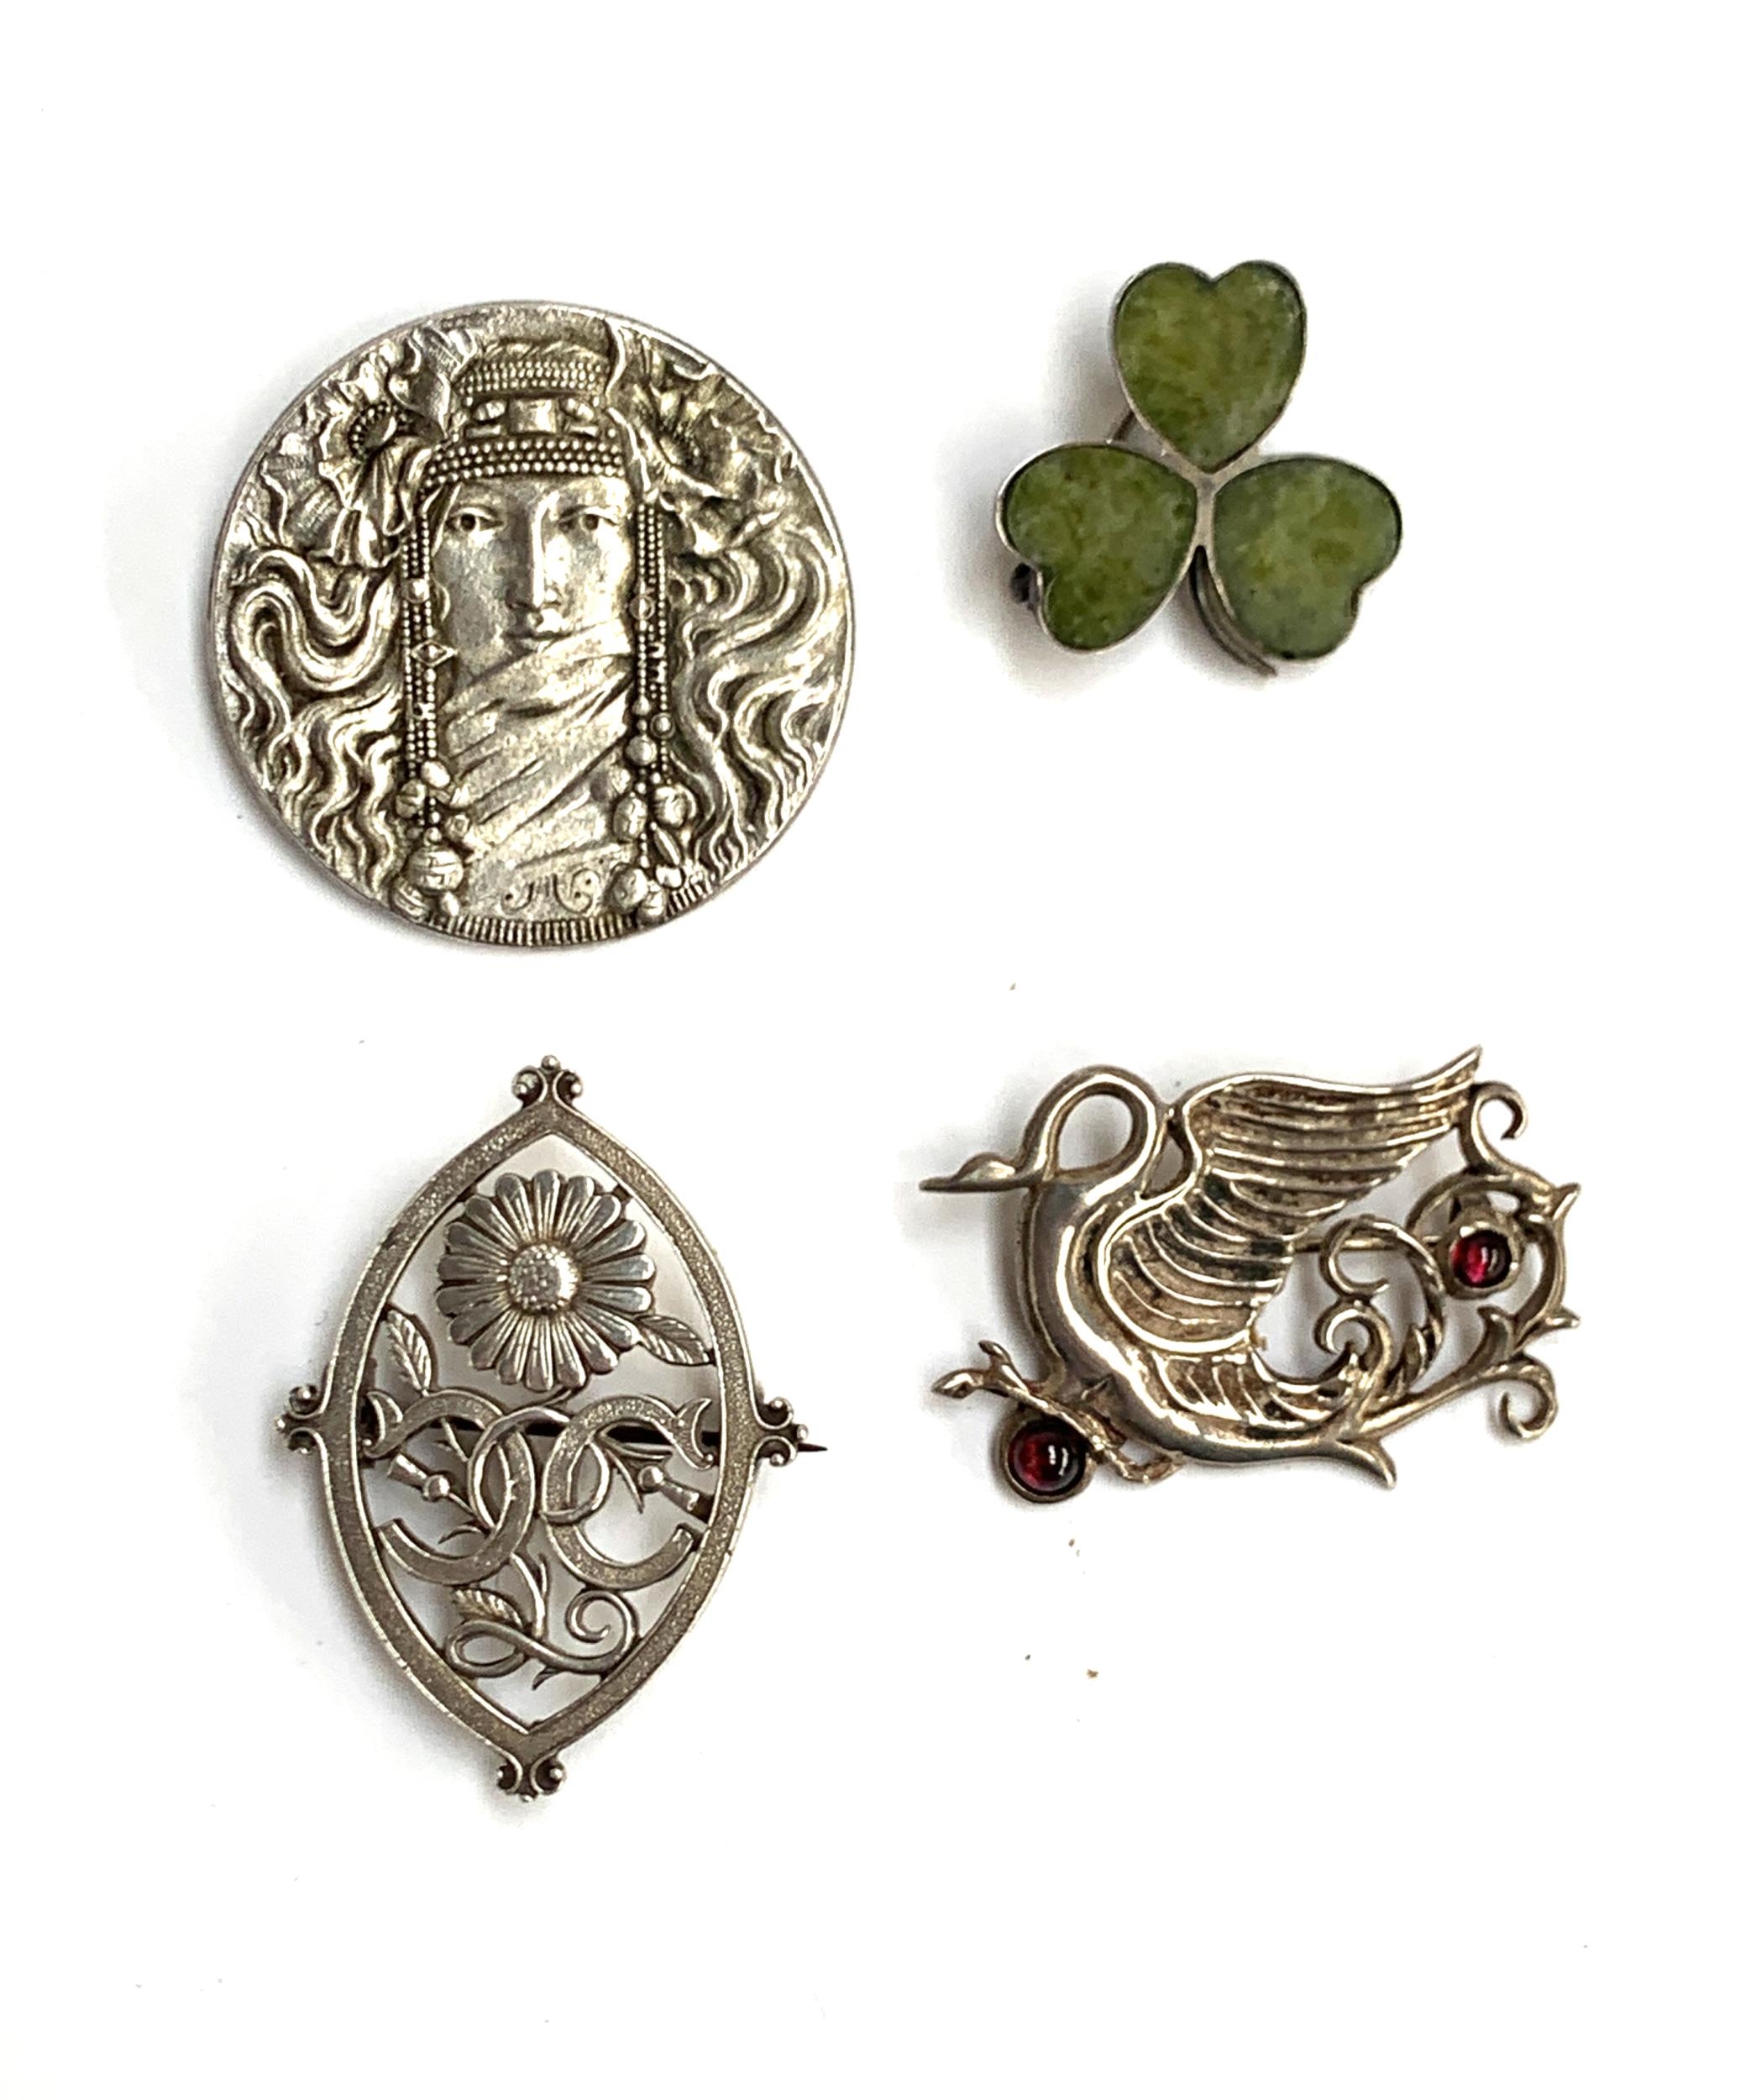 Four brooches: An early 20th century silver Connemara marble clover brooch, A silver Arts and Crafts